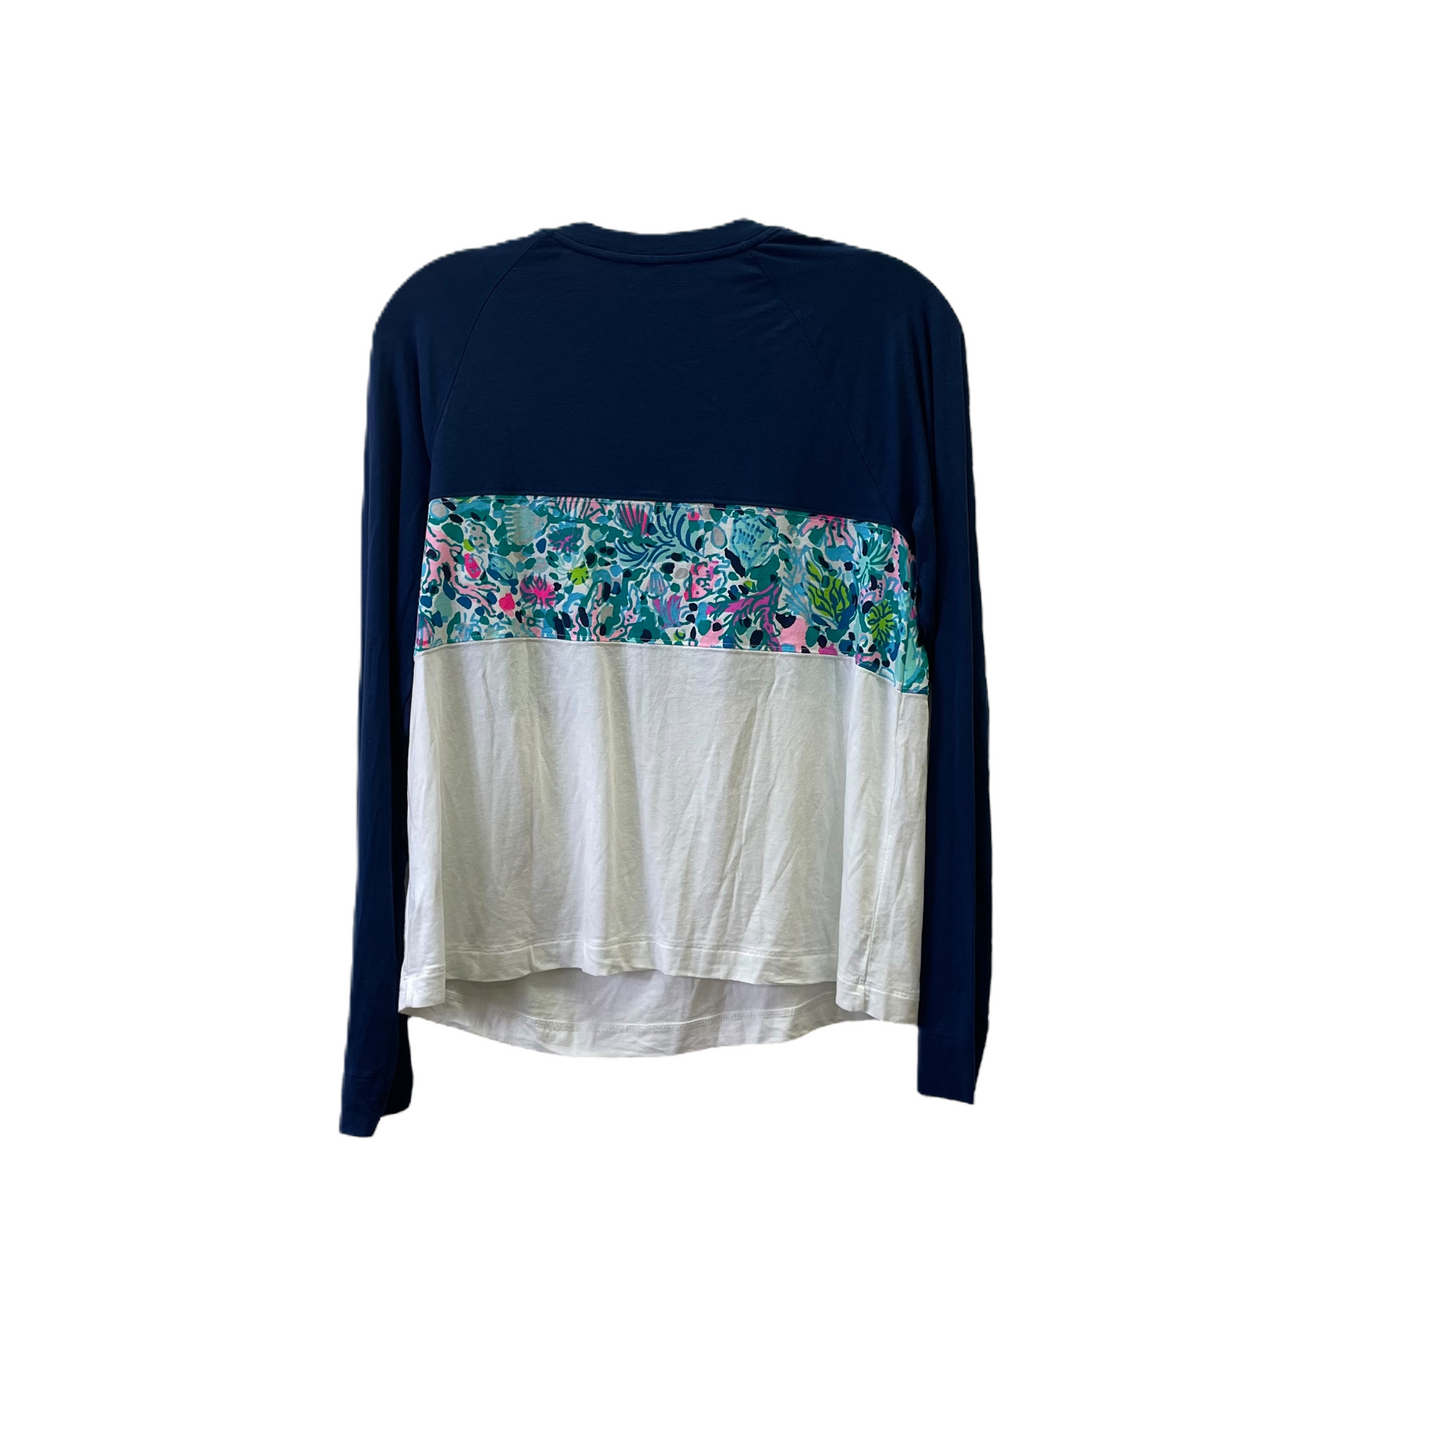 Blue Top Long Sleeve By Lilly Pulitzer, Size: M